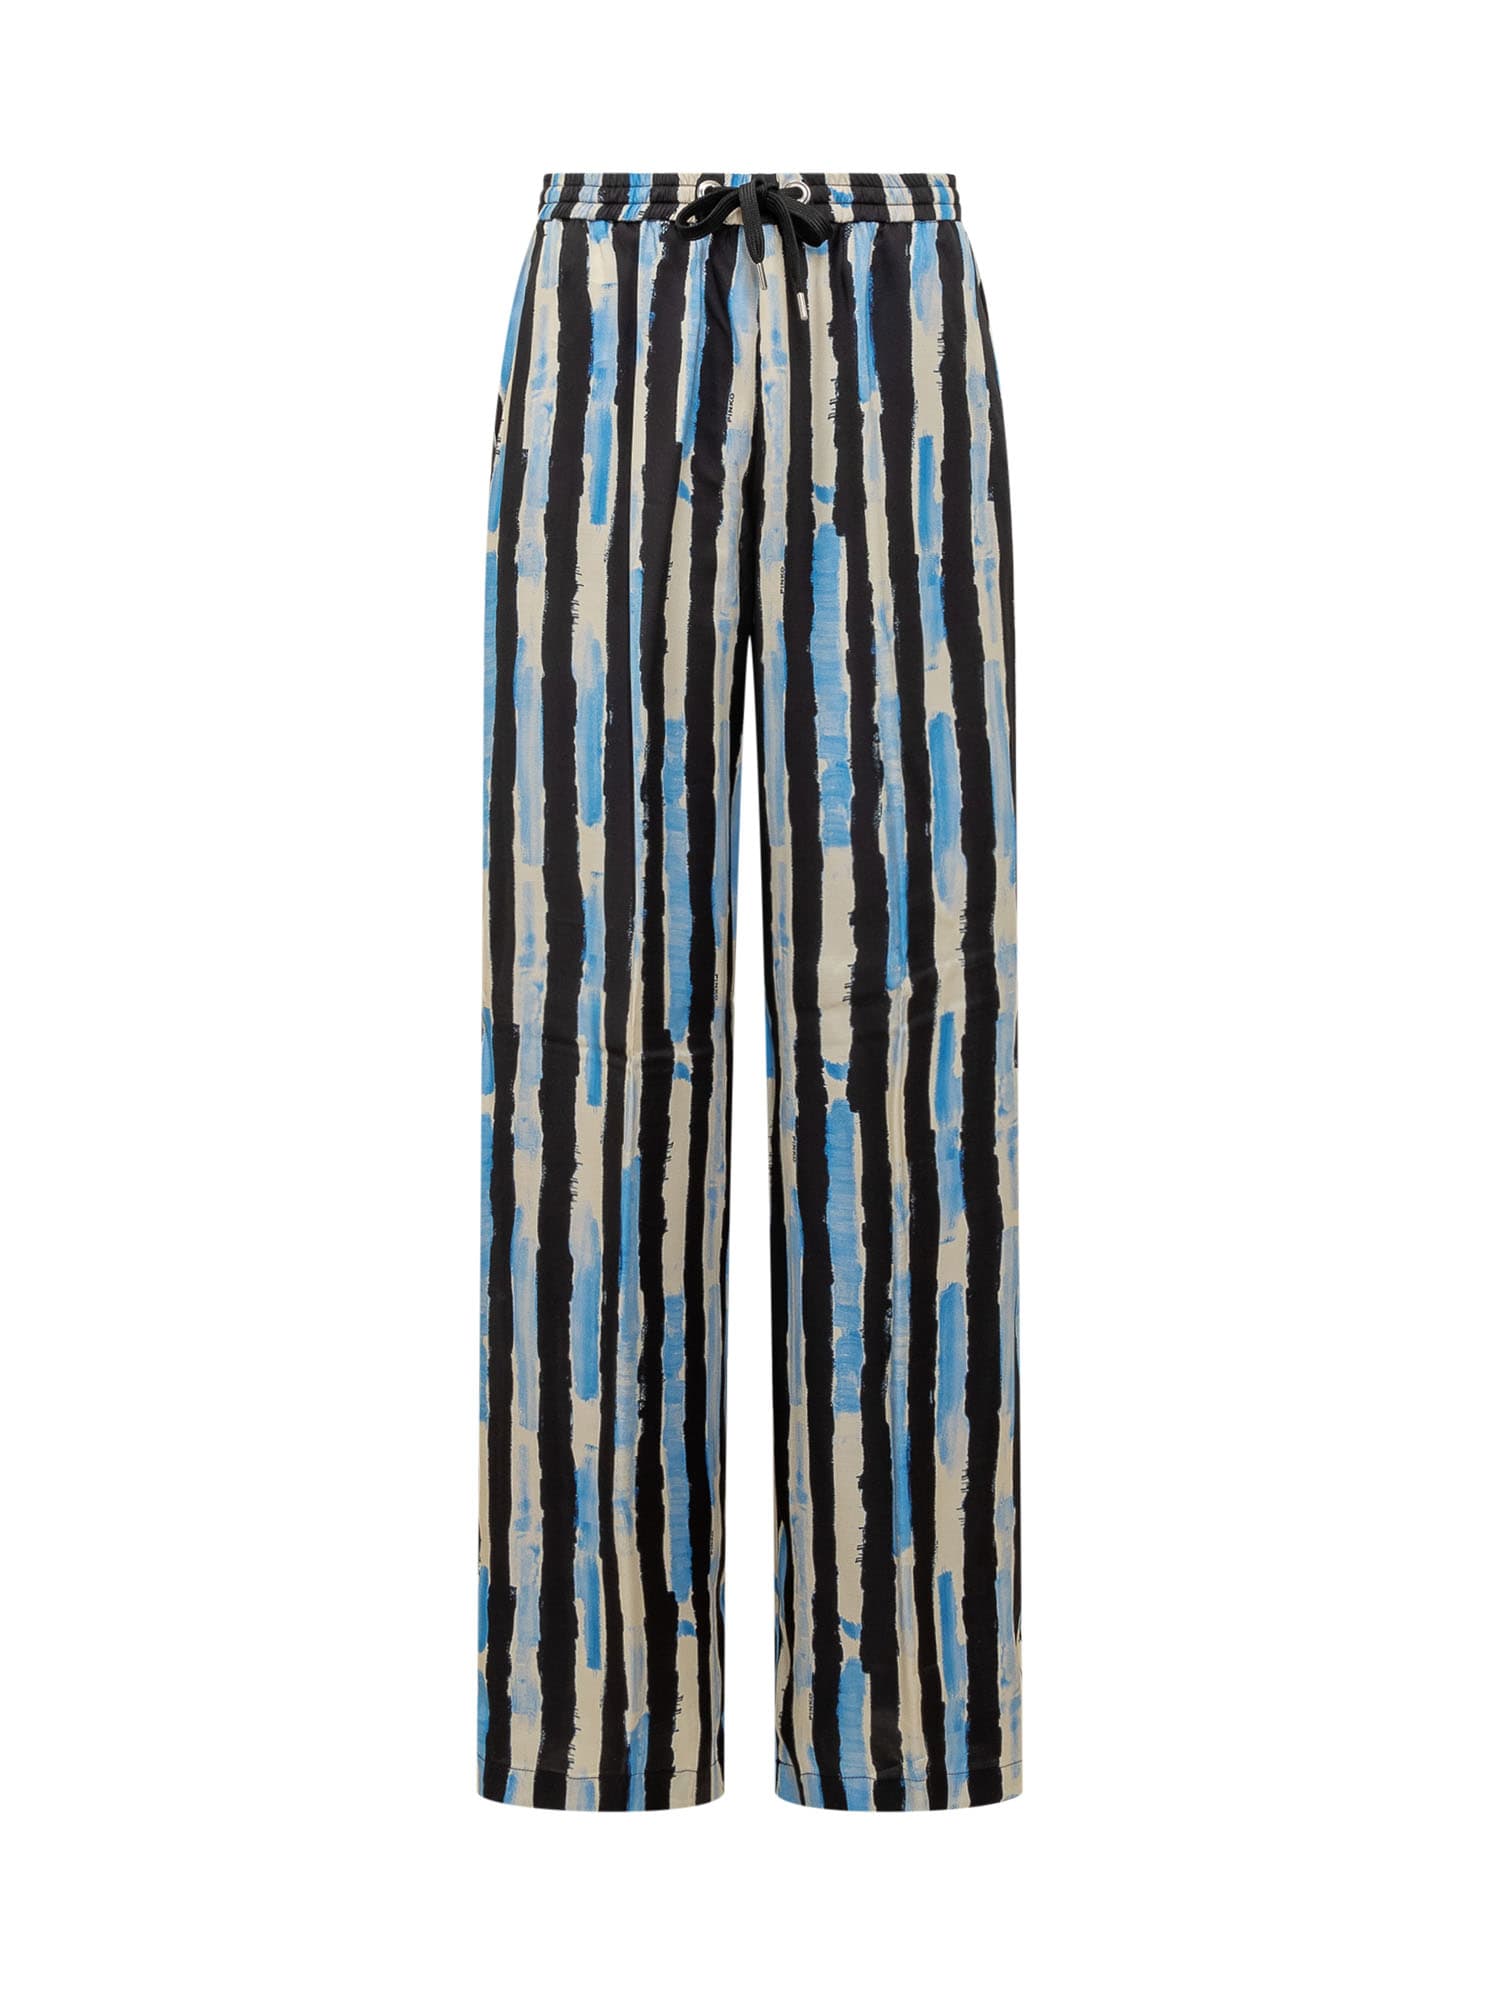 Poirot Pants With Pictorial Stripe Print